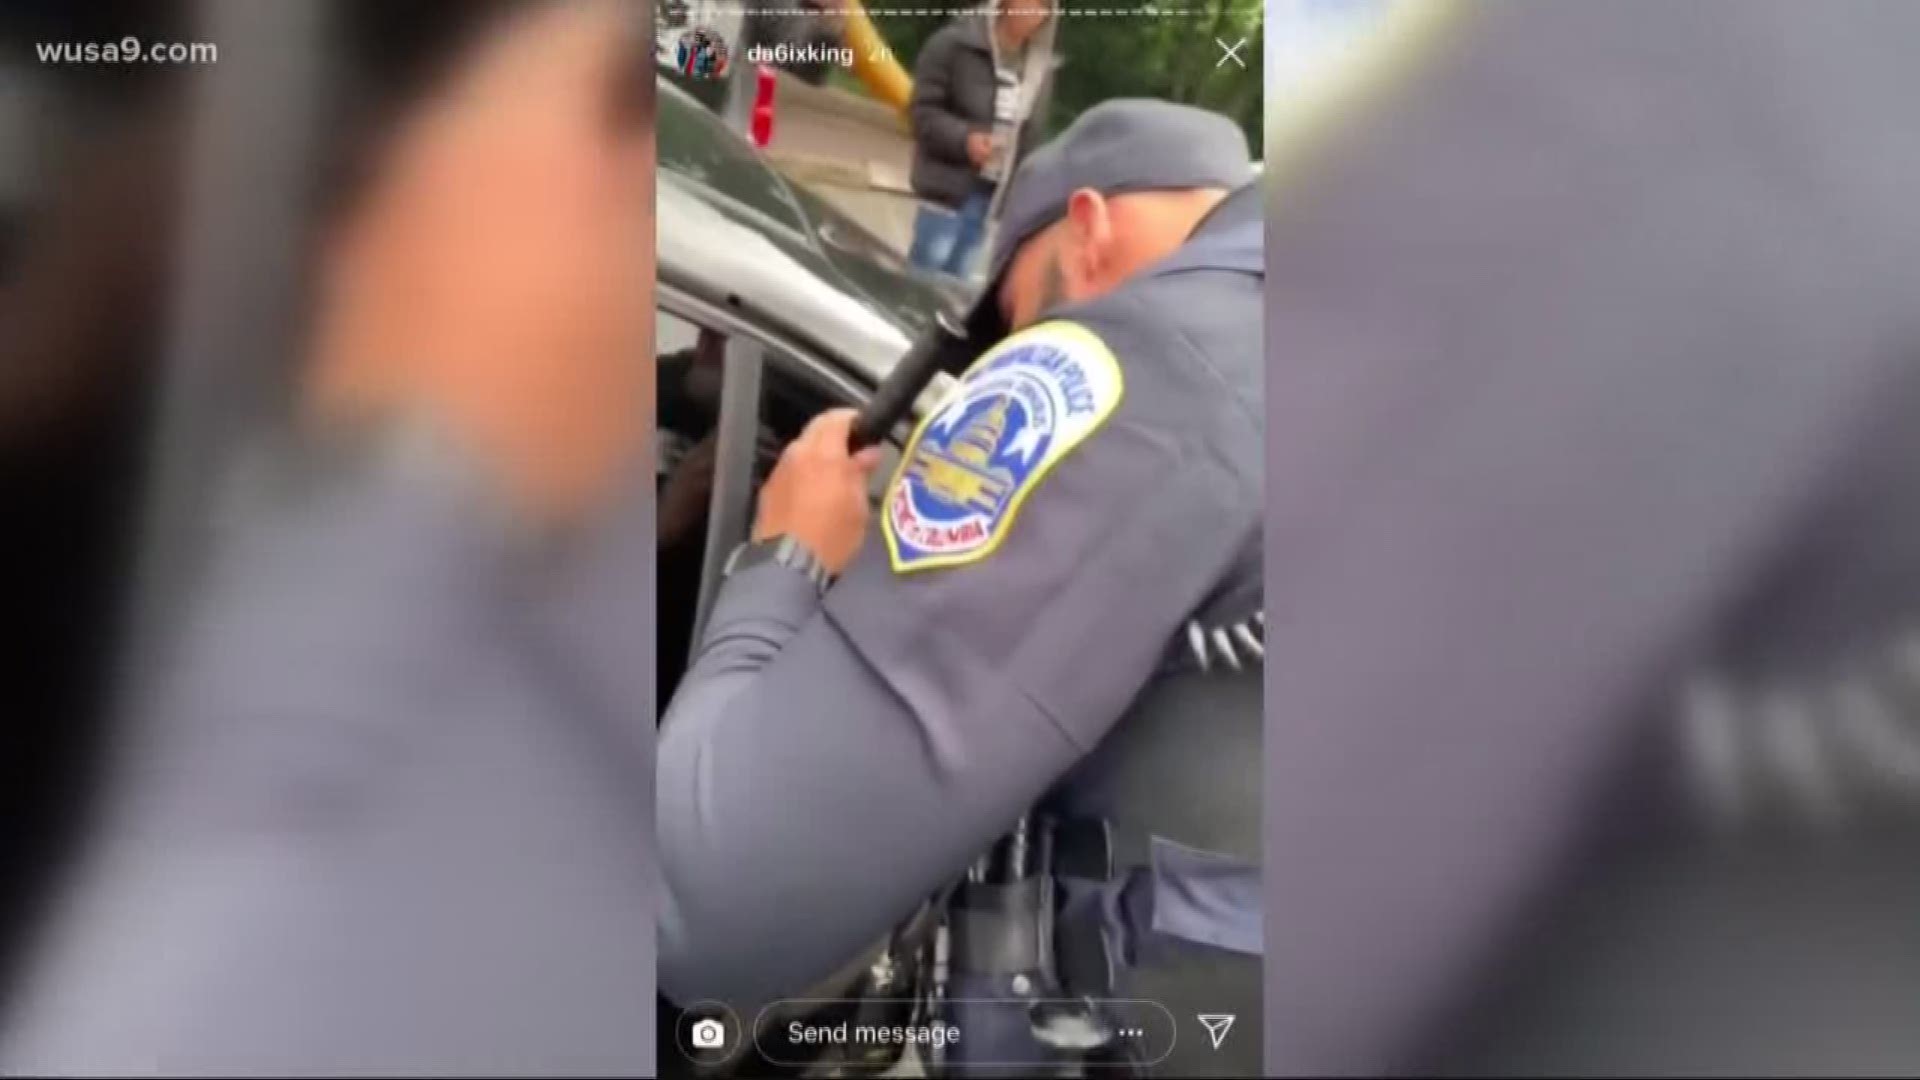 A new video is raising more questions tonight about the way DC police patrol predominantly Black neighborhoods. These images are flying across social media tonight a day after an ACLU report that found DC officers arrest black people at ten times the rate of white people.